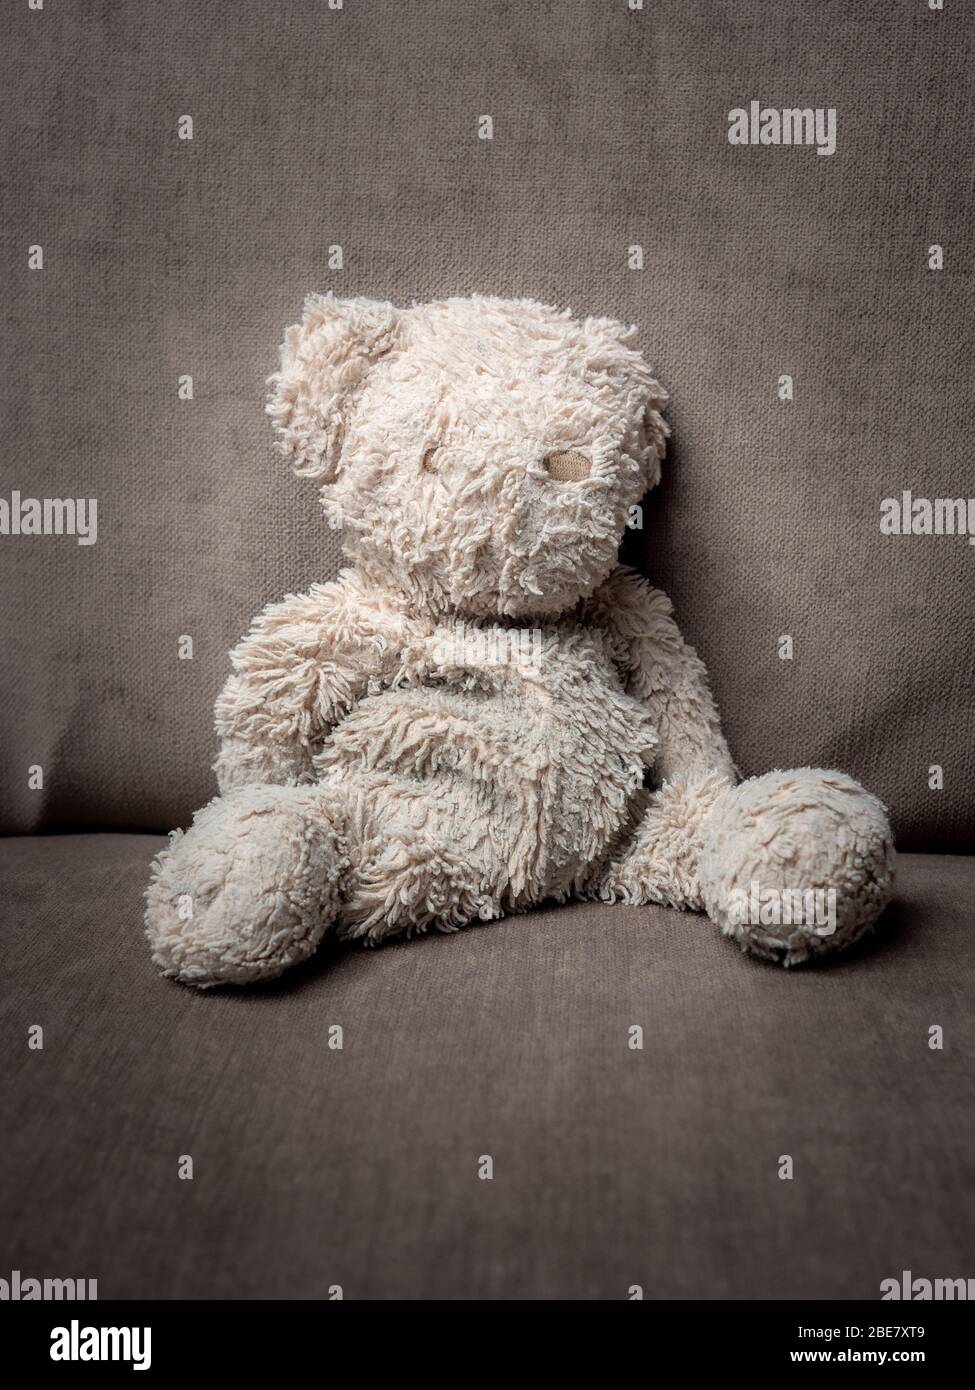 A tired, old teddy bear sitting, collapsed on a grey cushion Stock Photo